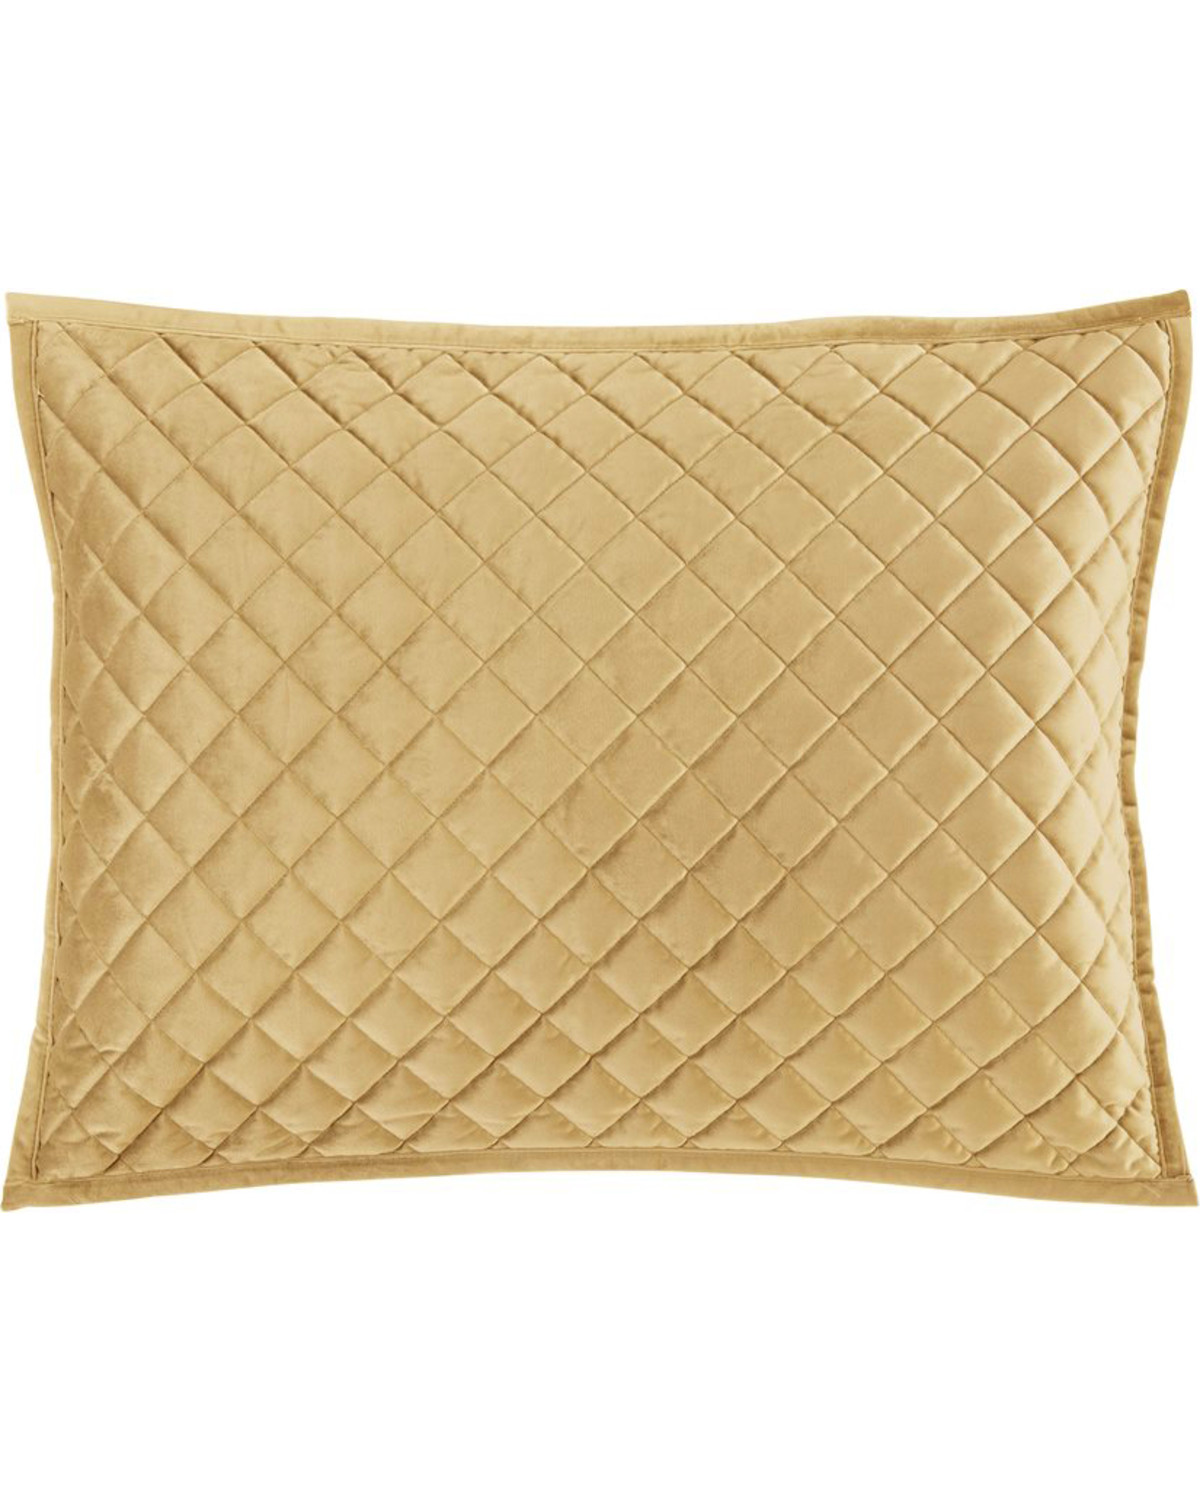 HiEnd Accents King Gold Diamond Quilted Shams